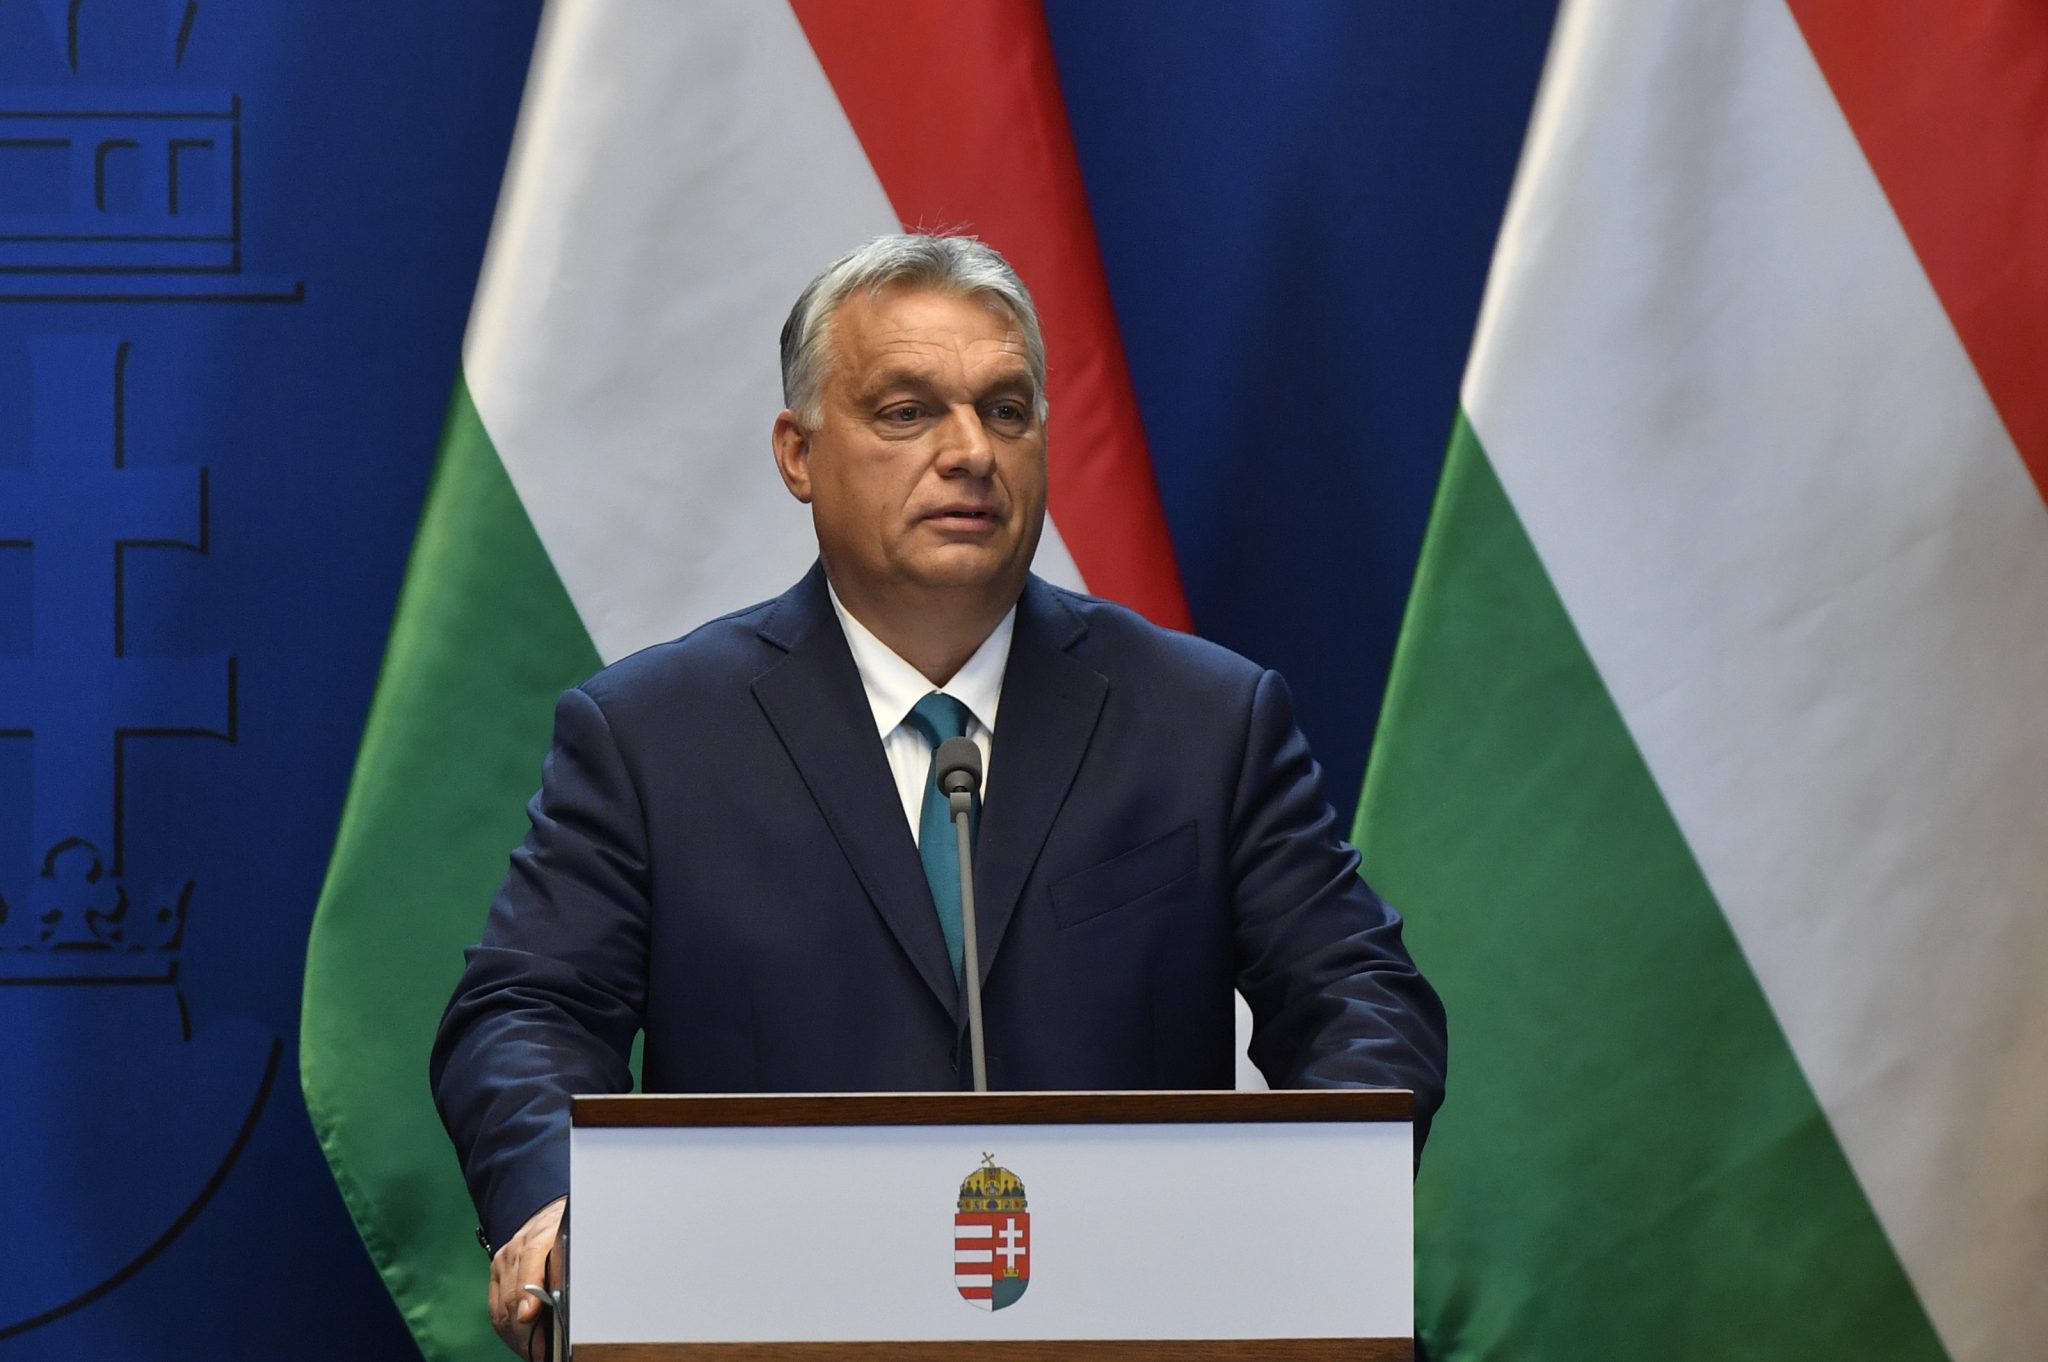 Hungary 'In Decisive Phase' Of Covid-19 Fight